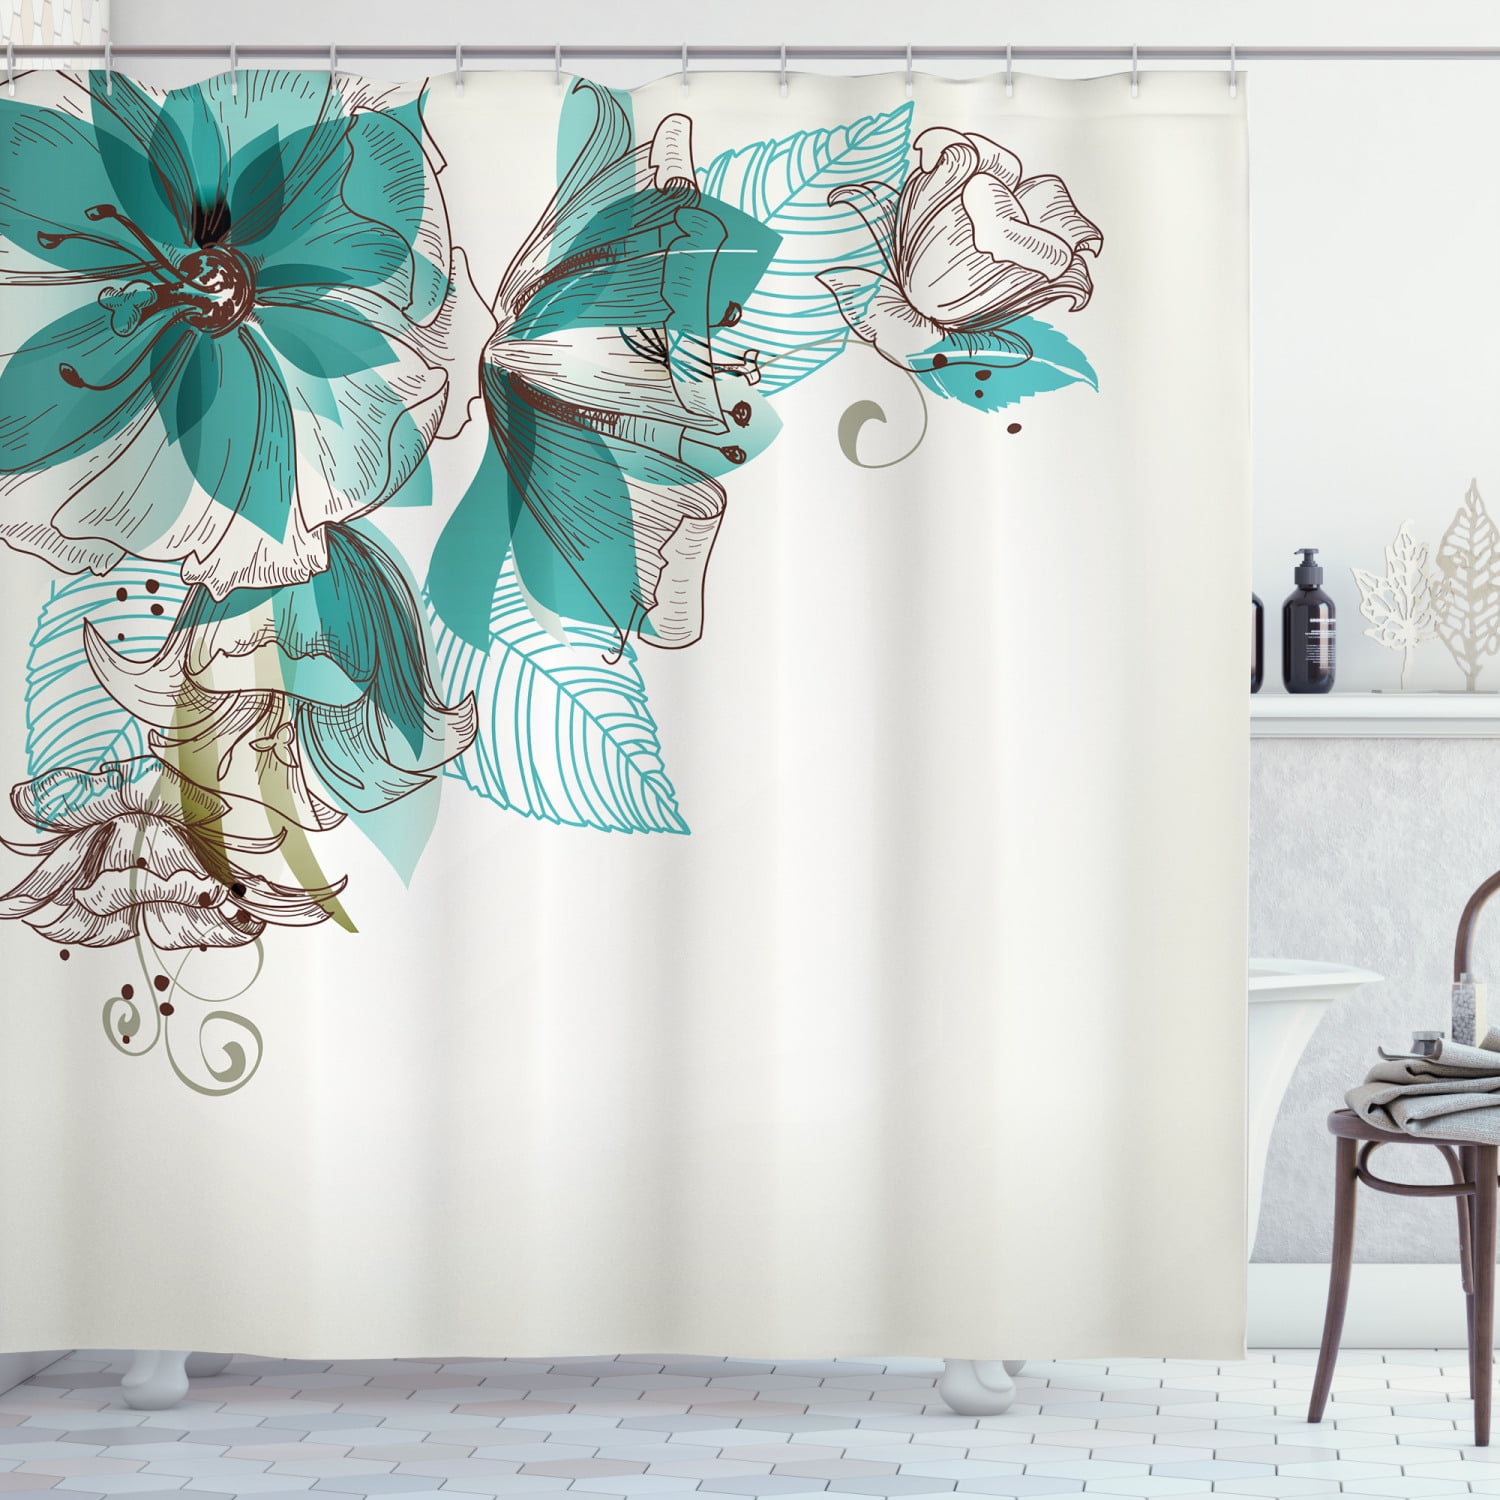 Abstract Watercolor Horse with Flowers Fabric Shower Curtain Set for Bathroom 